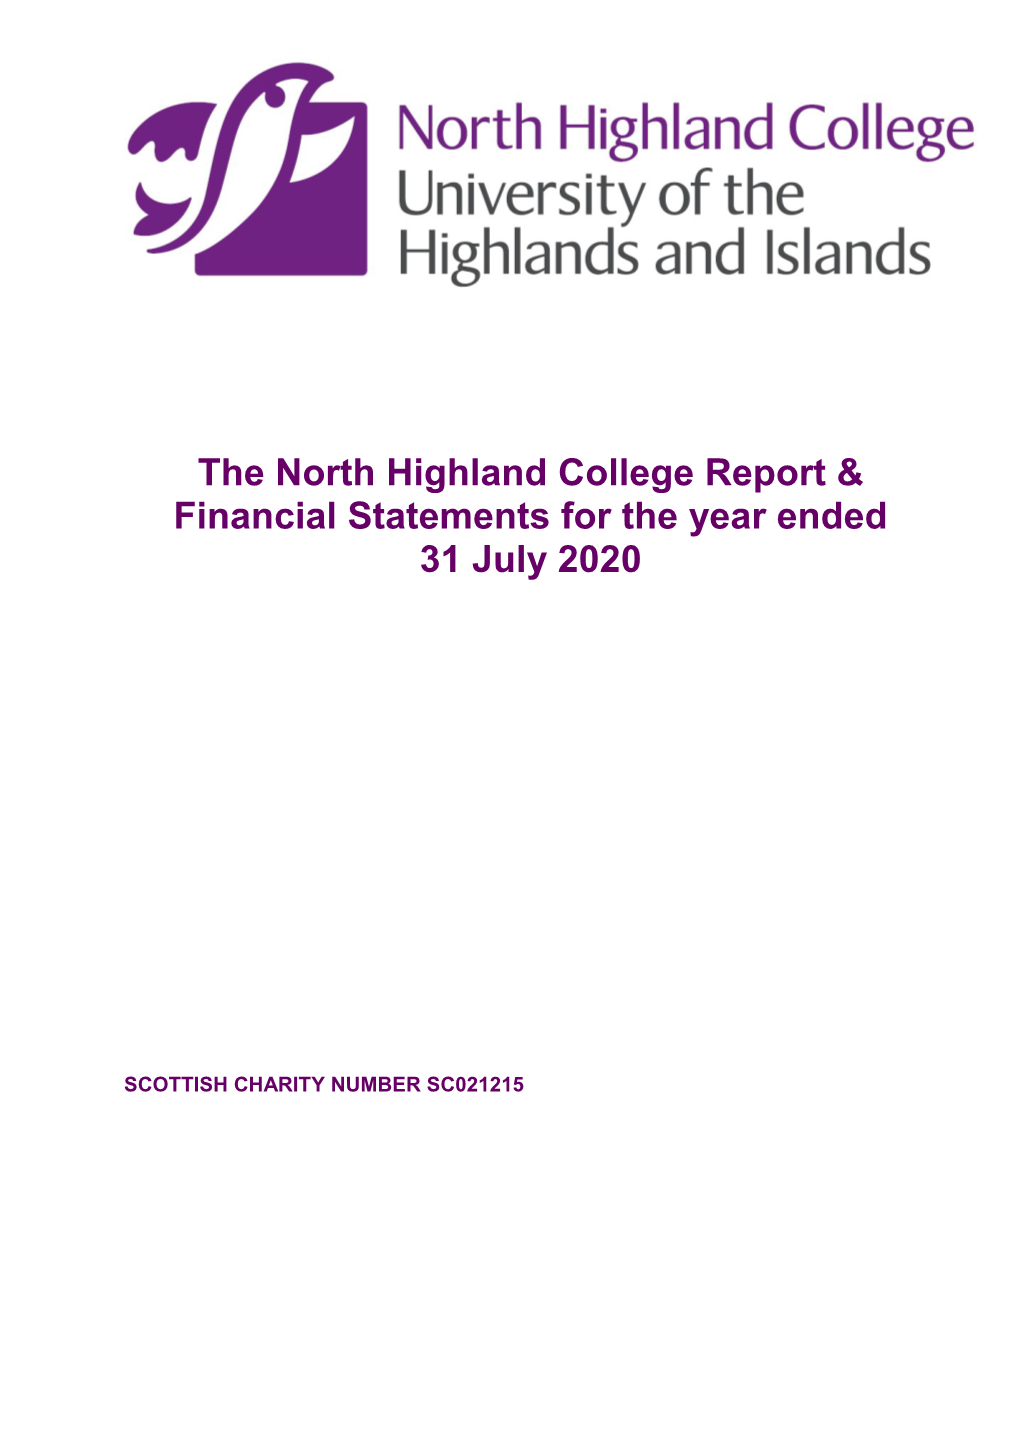 North Highland College Report & Financial Statements for the Year Ended 31 July 2020